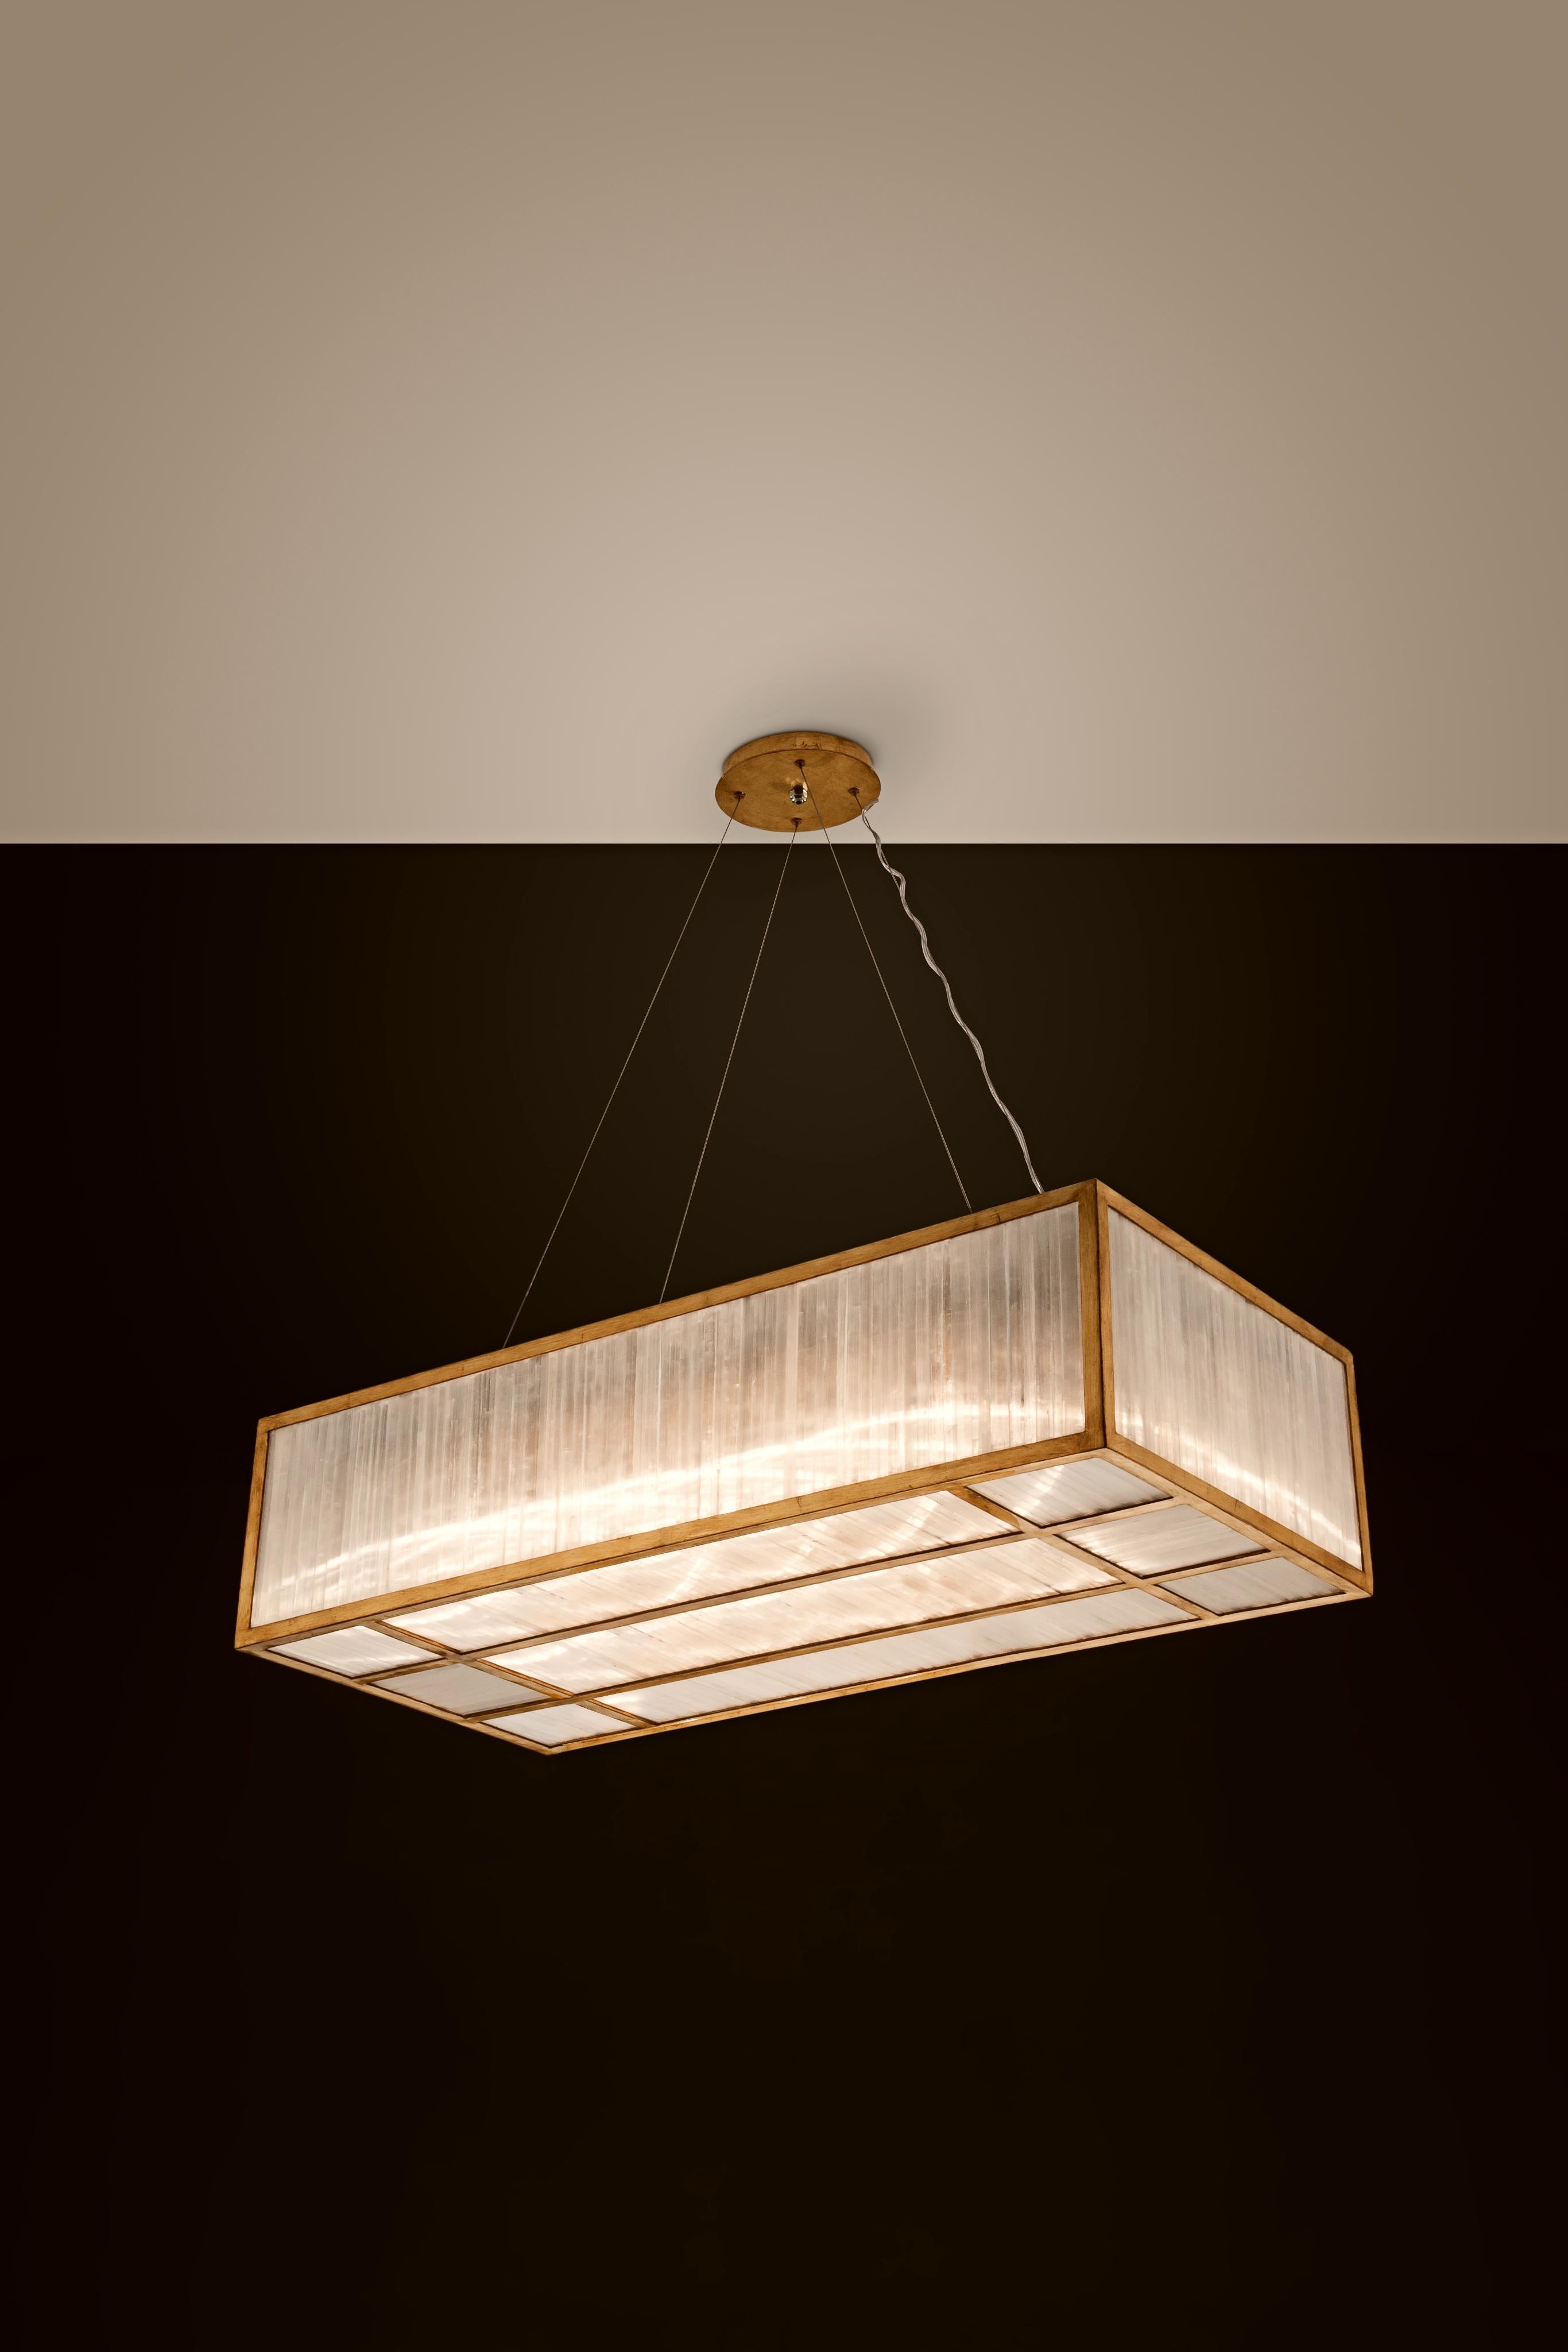 Selenite rectangular pendant lamp By Aver
Dimensions: D 50 x W 100 x H 25 cm
Materials: Selenite, metal.
Also available: silver leaf, antique silver leaf, gold leaf, brass leaf, copper leaf, pink gold leaf.

Cylindrical pendant with a beautiful